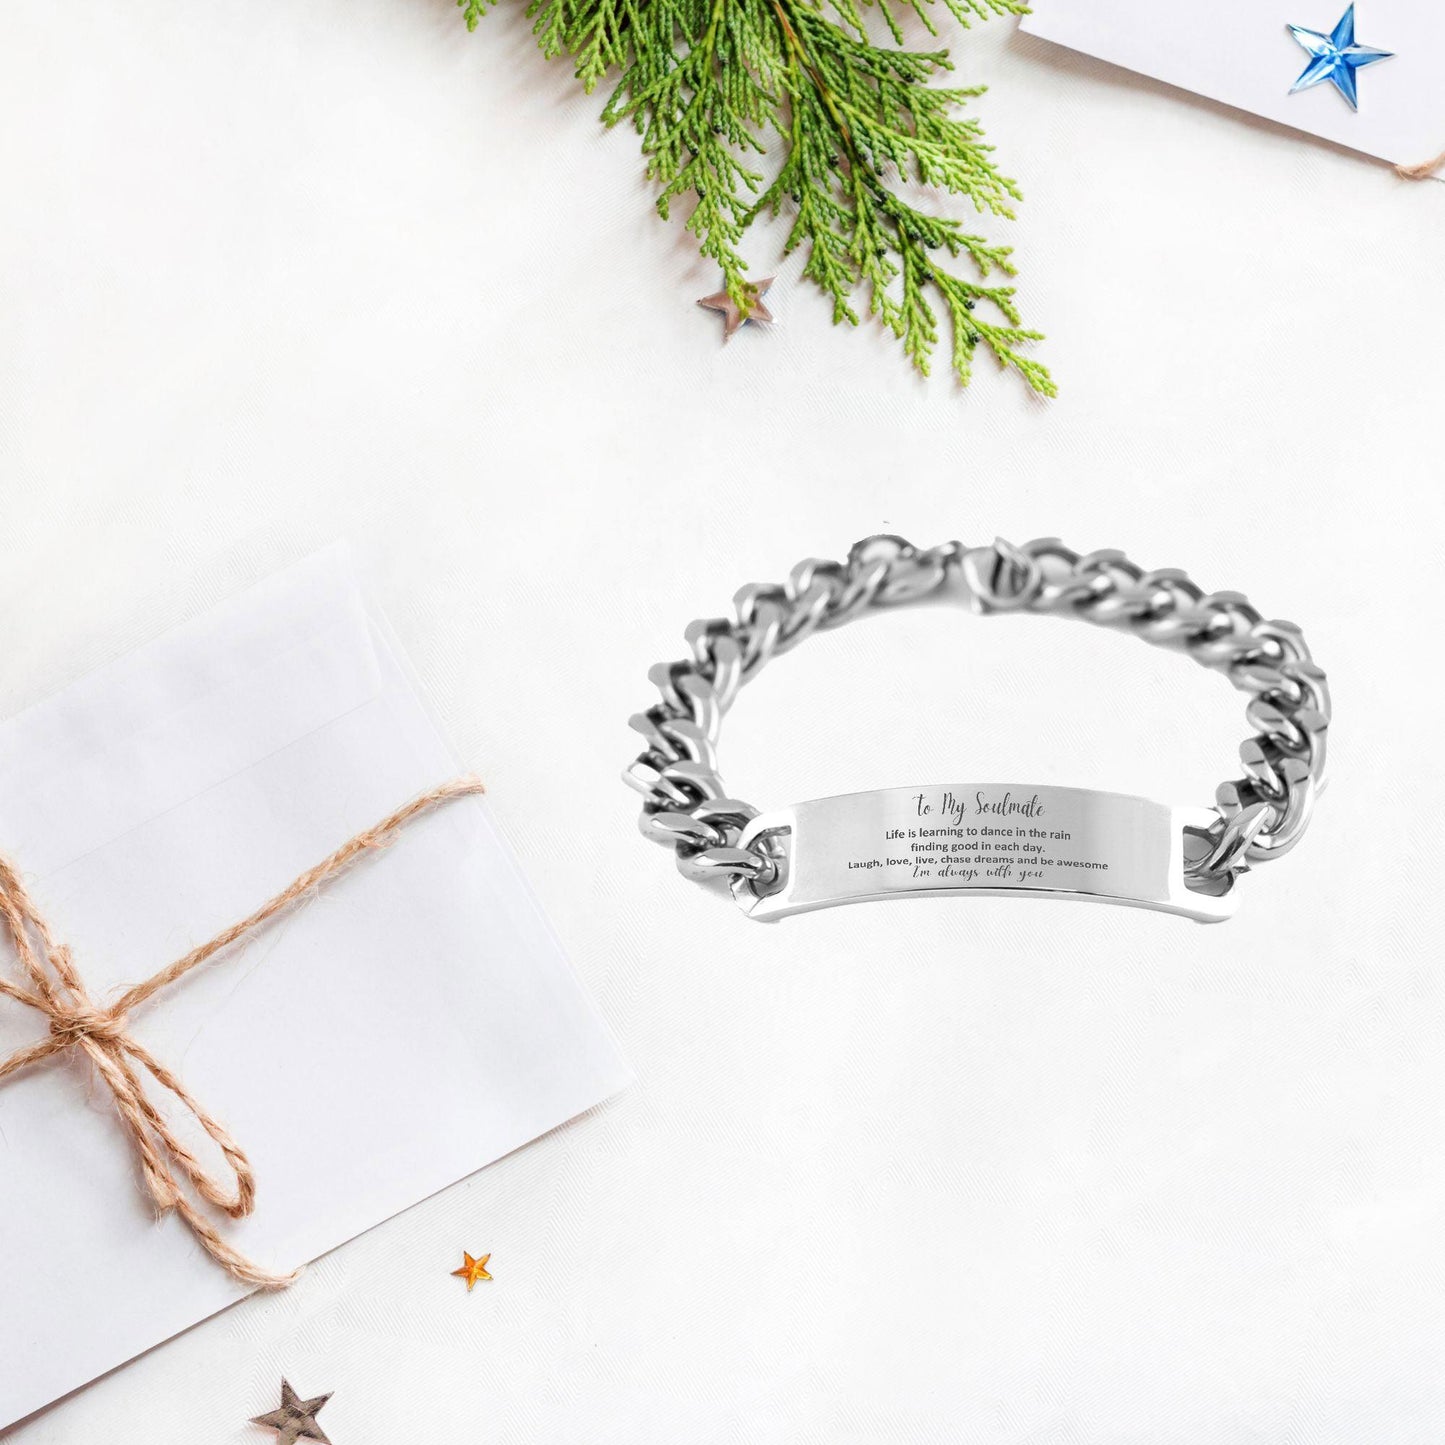 Heartfelt Soulmate Engraved Cuban Chain Stainless Steel Bracelet - Life is Learning to Dance in the Rain, I'm always with you - Birthday, Christmas Holiday Gifts - Mallard Moon Gift Shop